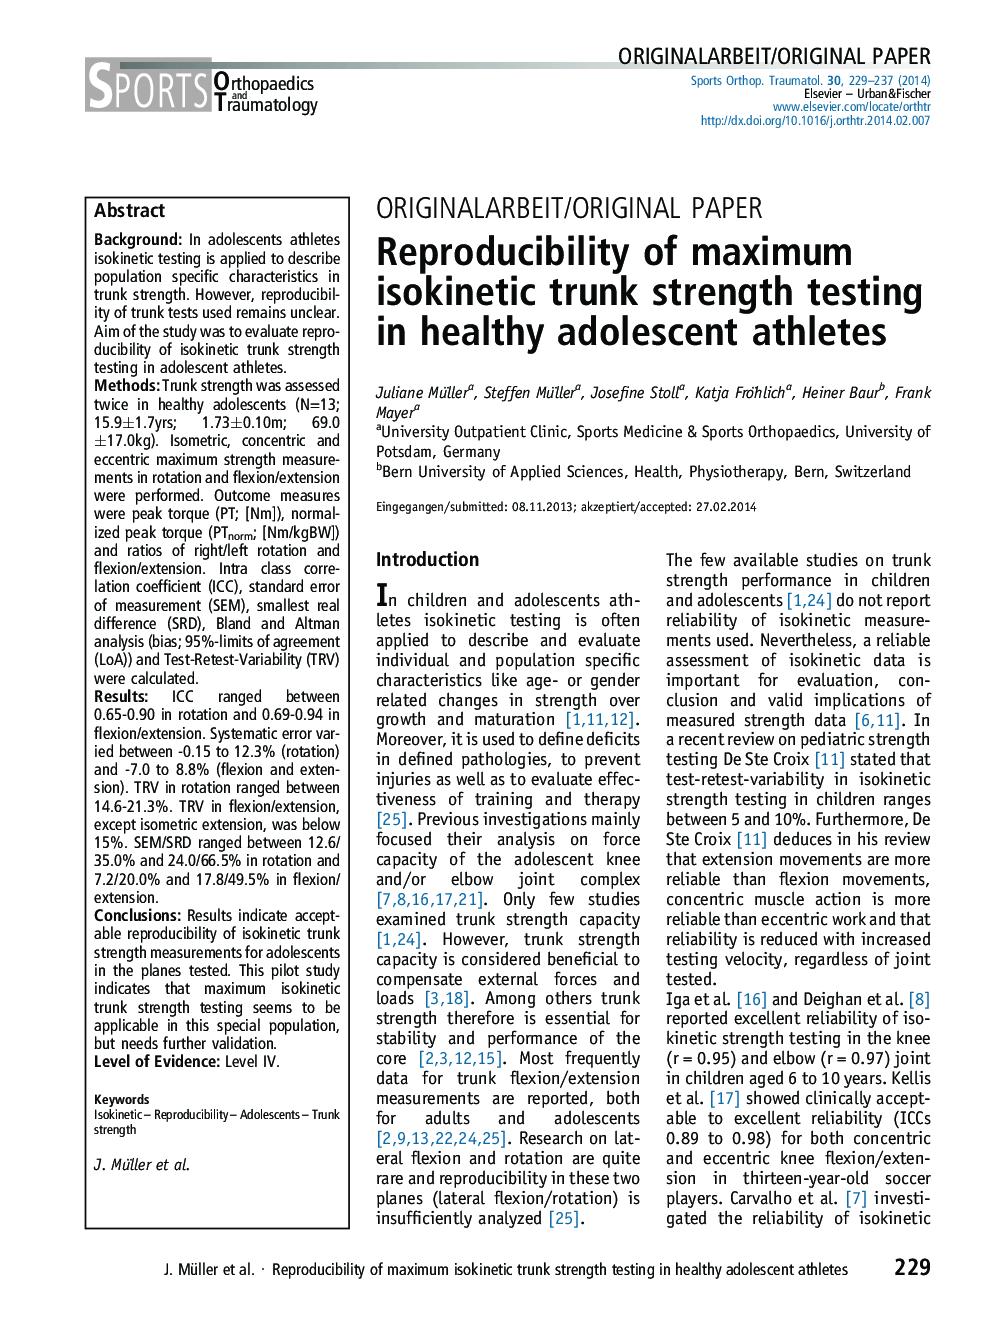 Reproducibility of maximum isokinetic trunk strength testing in healthy adolescent athletes